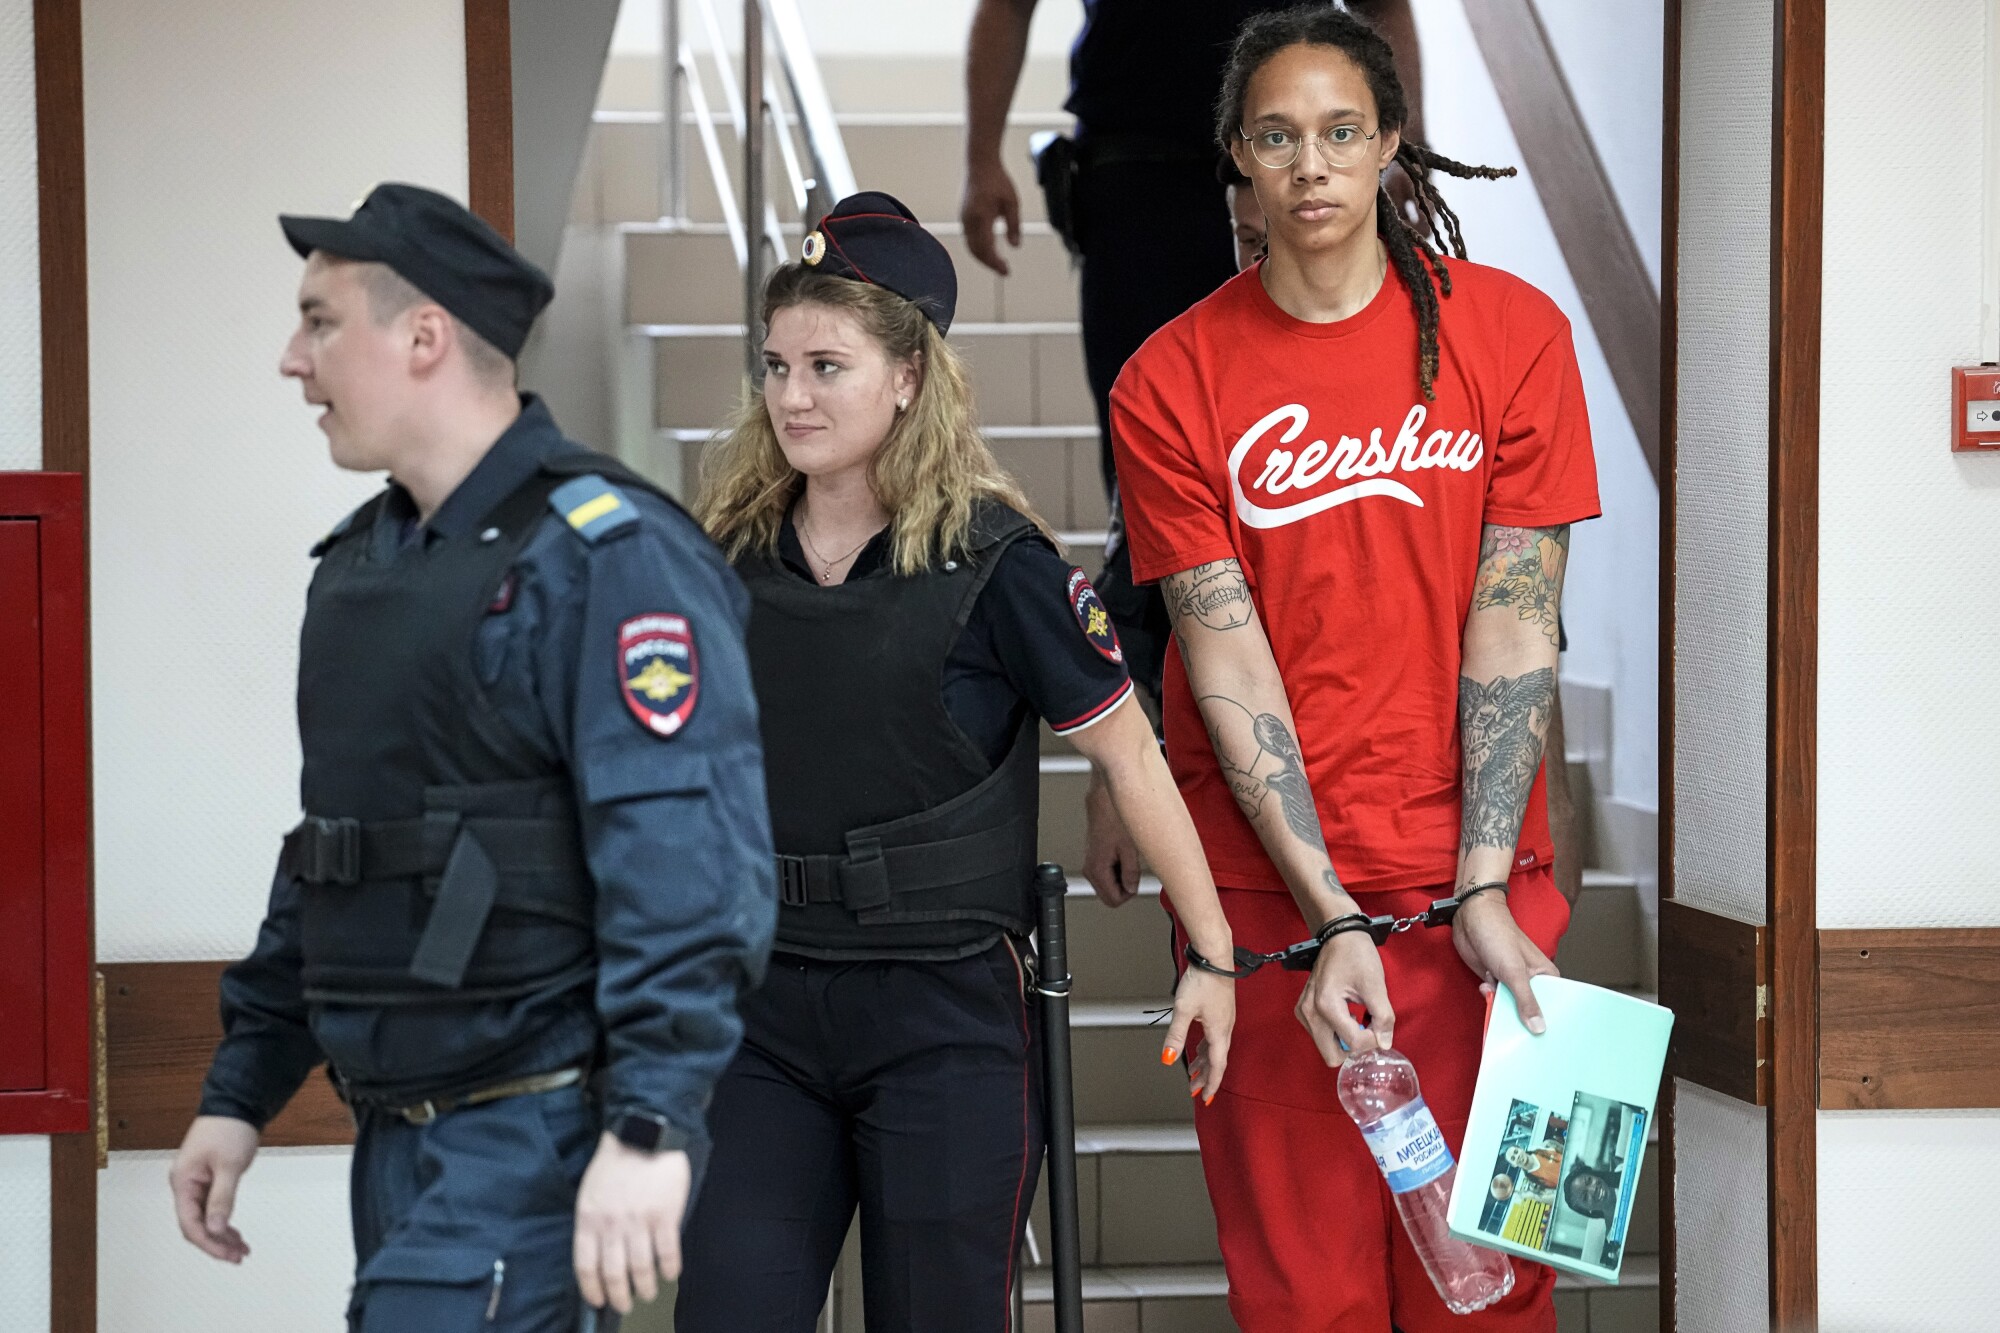 American basketball player Brittney Griner enters the court in Khimki, Russia, for her trial, Thursday, July 7, 2022.